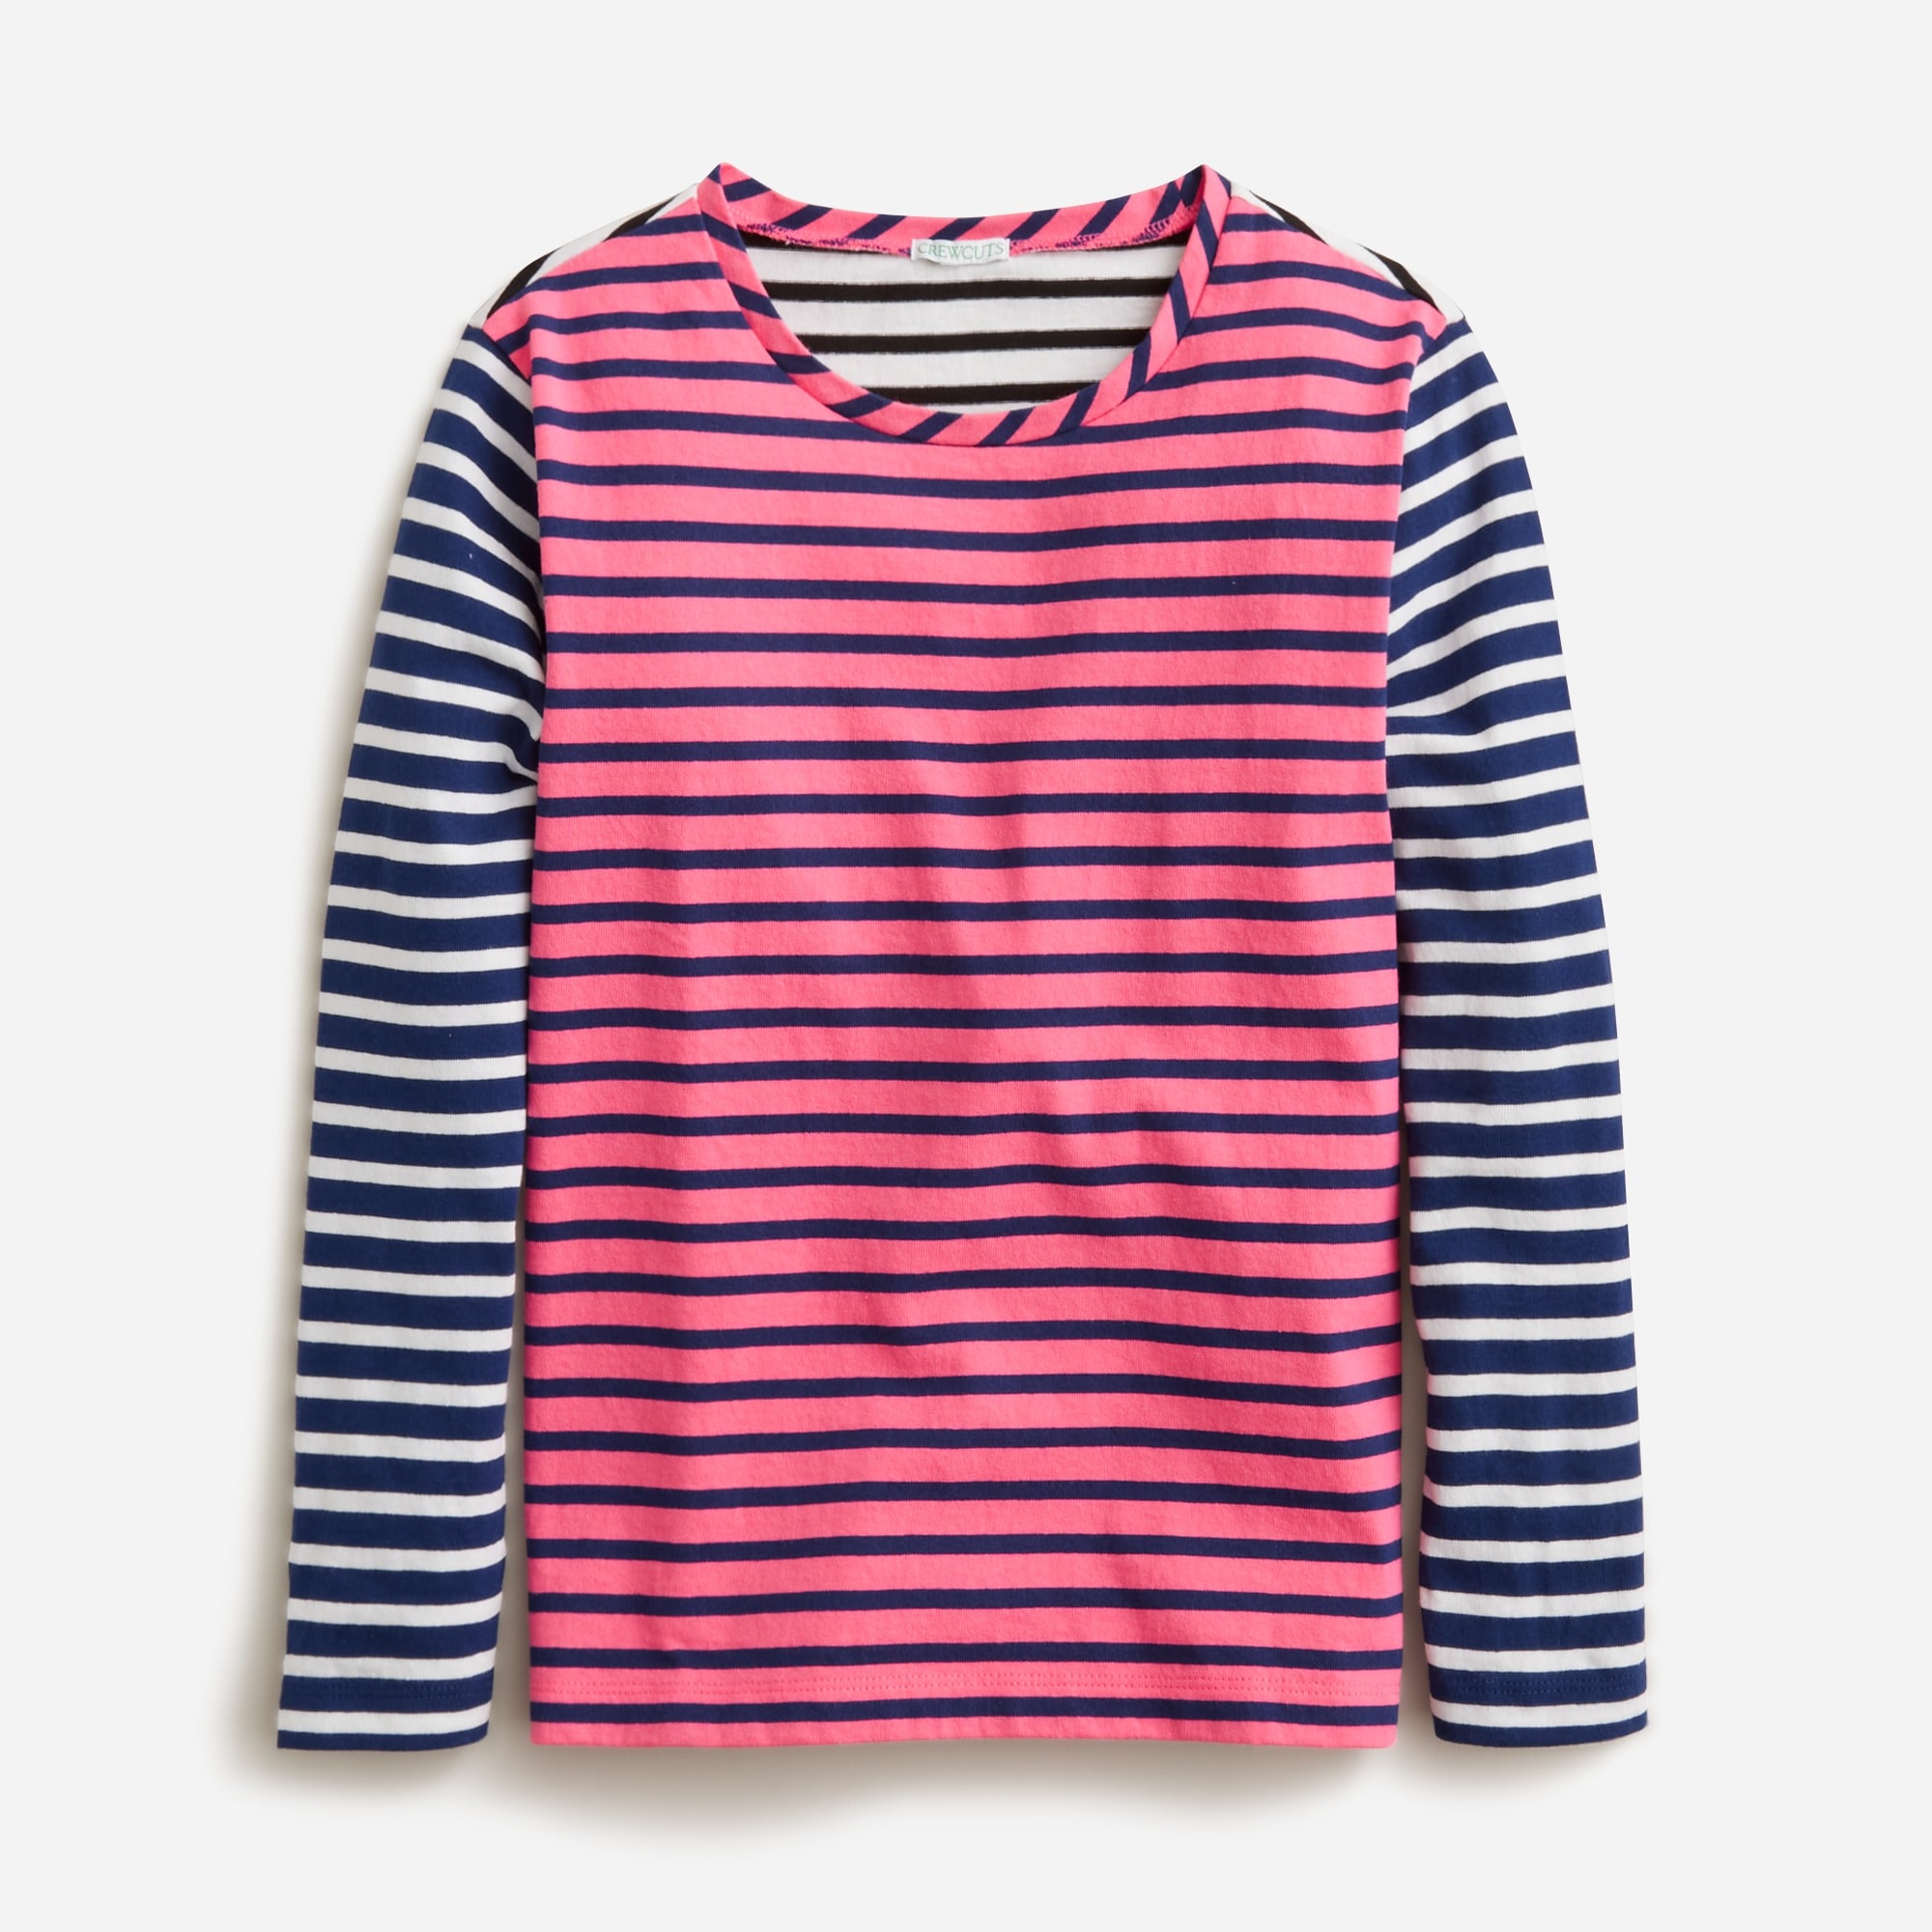  KID by crewcuts T-shirt in mixed stripe